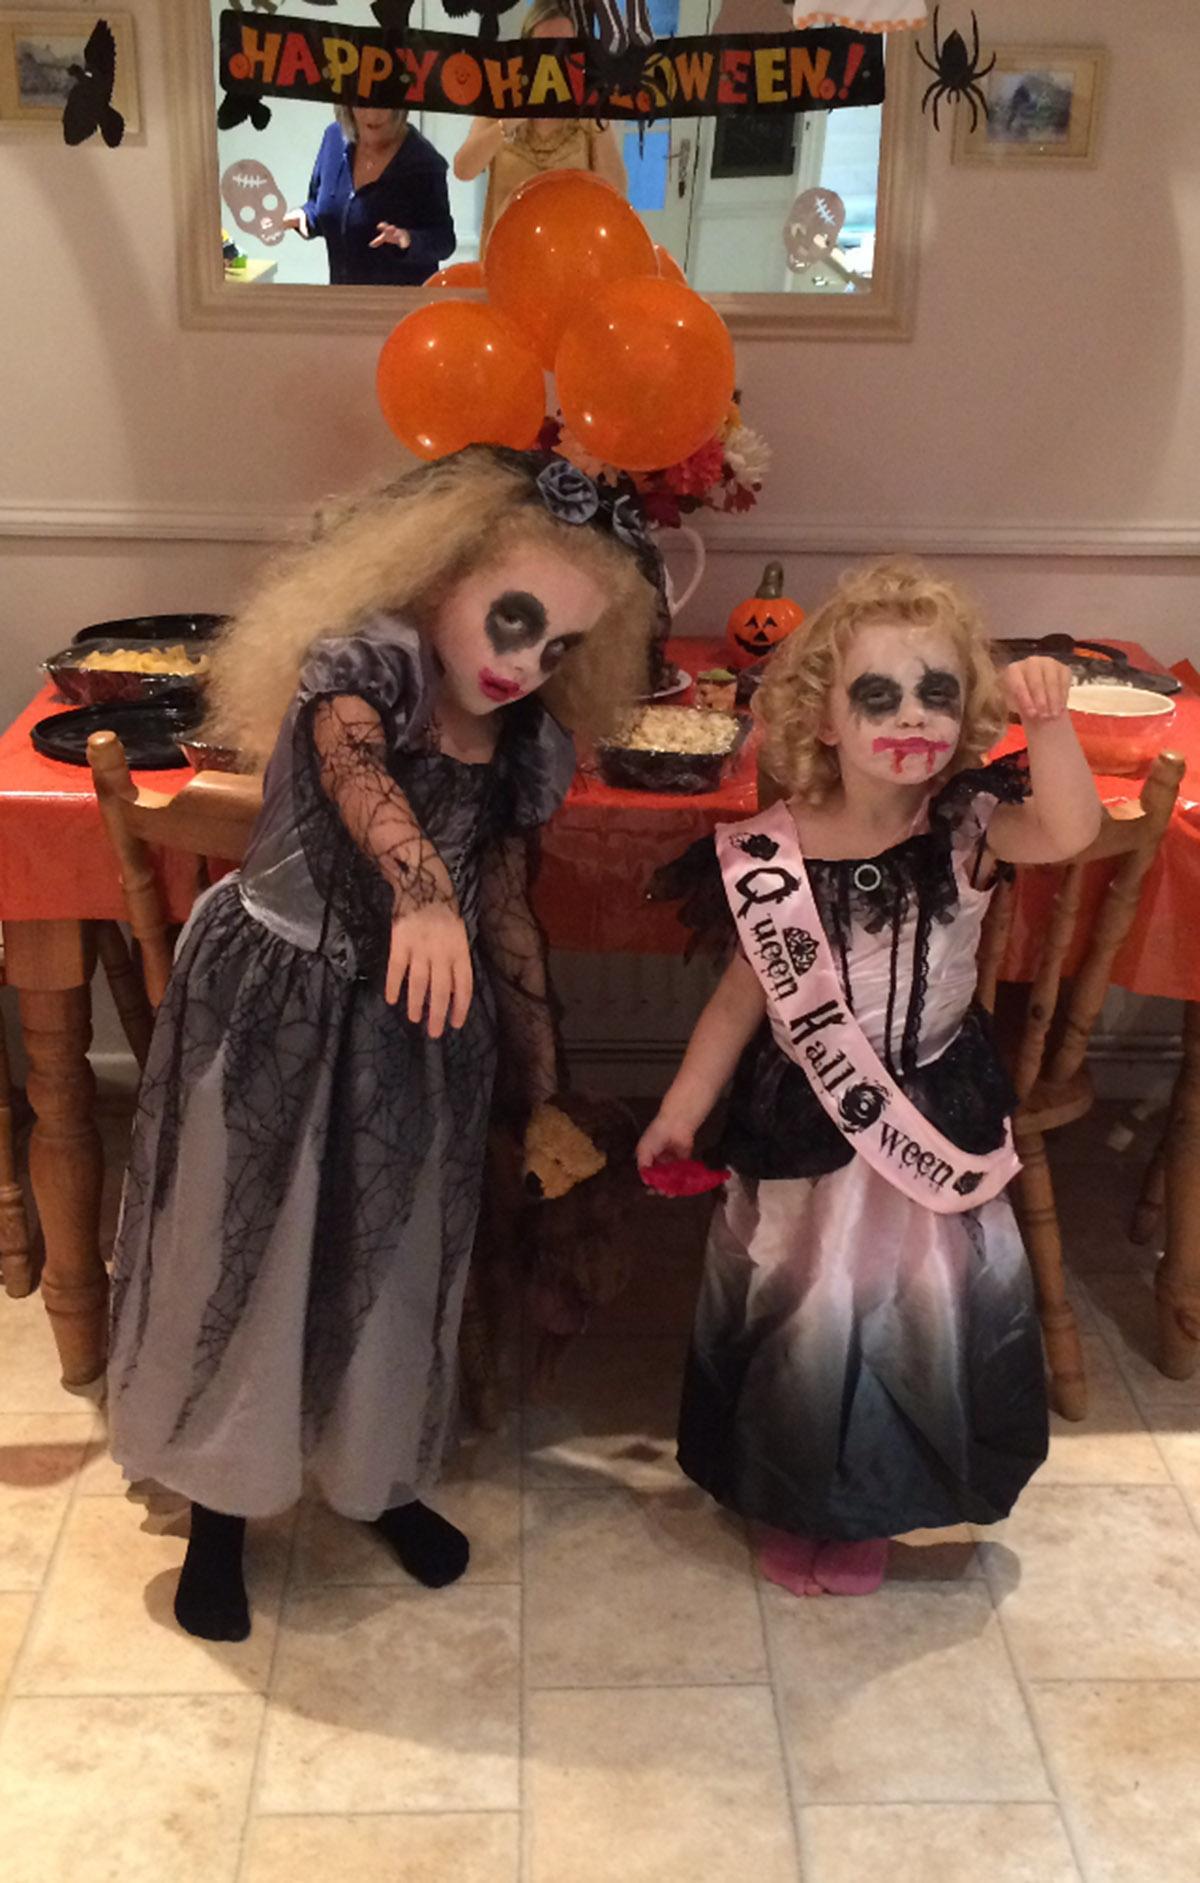 Halloween 2015: Erin Mack, aged 6 and
Tilly Mack, aged 3